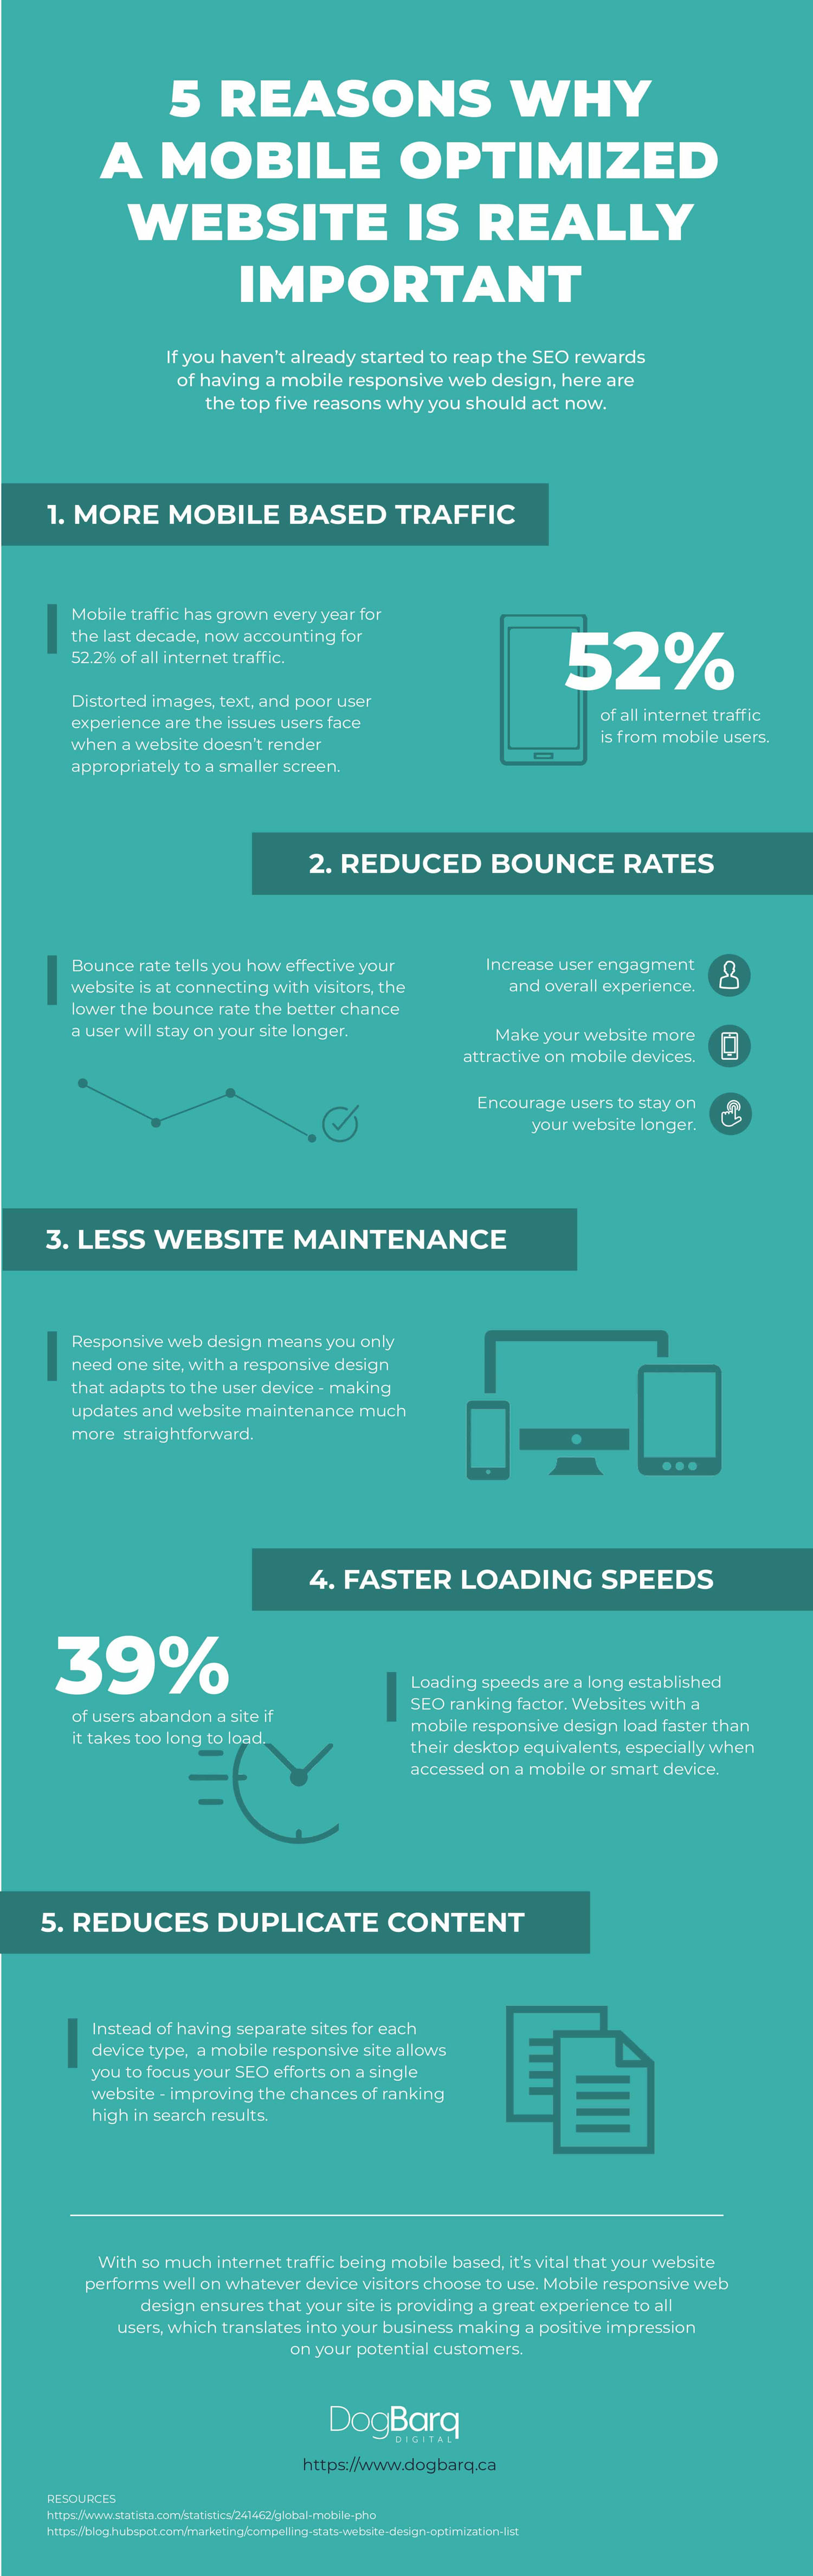 Infographic showing top 5 reasons to have a mobile optimized website